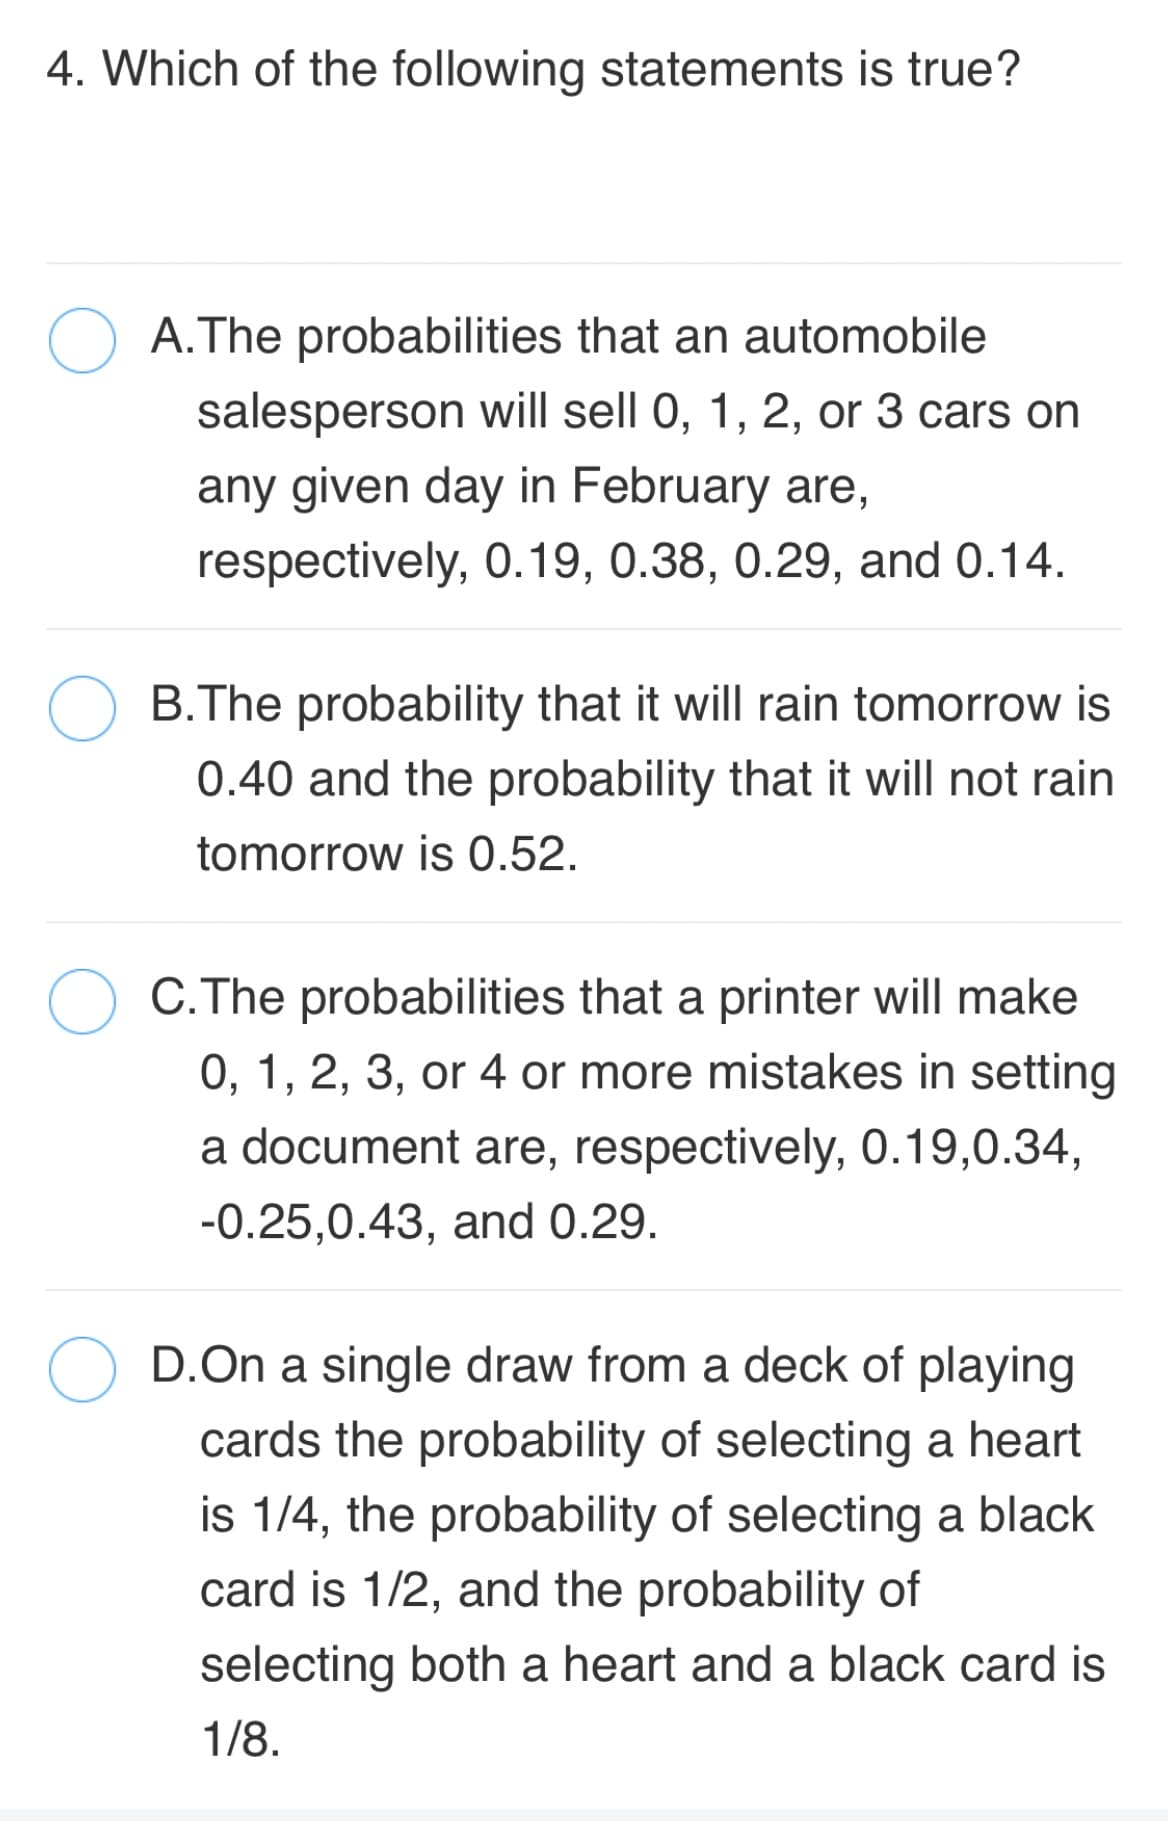 4. Which of the following statements is true?
O A.The probabilities that an automobile
salesperson will sell 0, 1, 2, or 3 cars on
any given day in February are,
respectively, 0.19, 0.38, 0.29, and 0.14.
B.The probability that it will rain tomorrow is
0.40 and the probability that it will not rain
tomorrow is 0.52.
C.The probabilities that a printer will make
0, 1, 2, 3, or 4 or more mistakes in setting
a document are, respectively, 0.19,0.34,
-0.25,0.43, and 0.29.
D.On a single draw from a deck of playing
cards the probability of selecting a heart
is 1/4, the probability of selecting a black
card is 1/2, and the probability of
selecting both a heart and a black card is
1/8.
